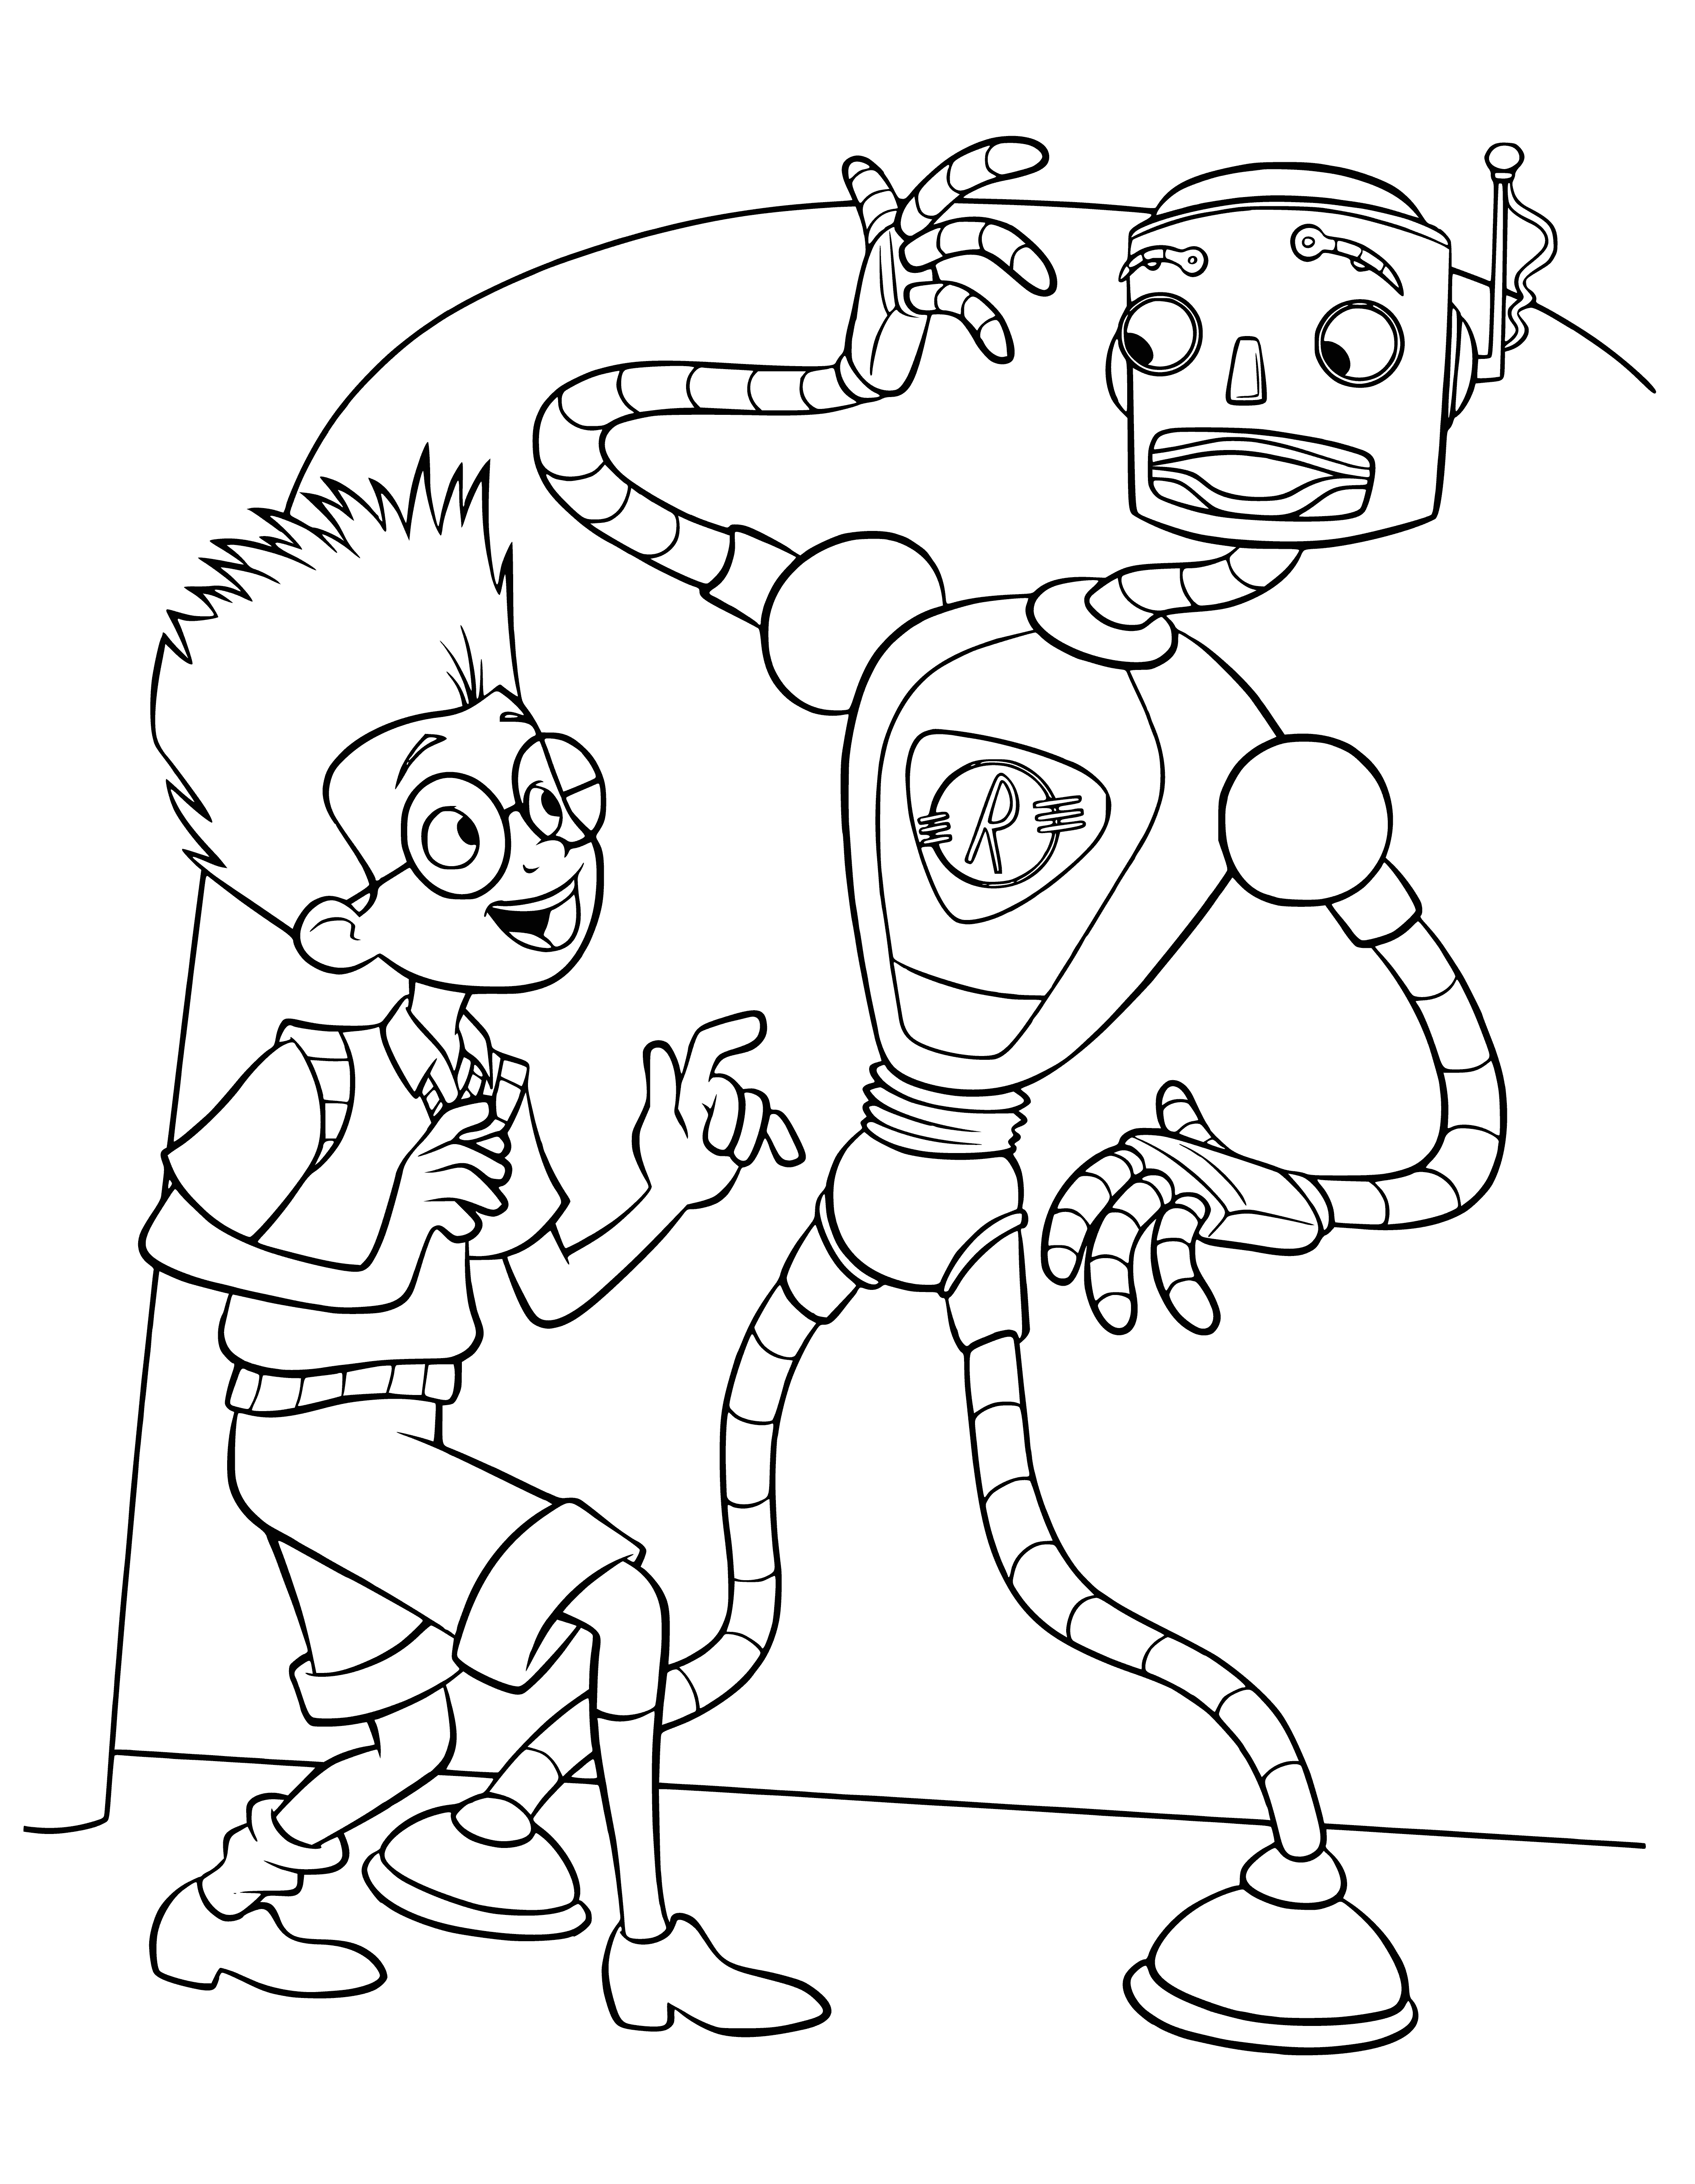 Carl the robot coloring page